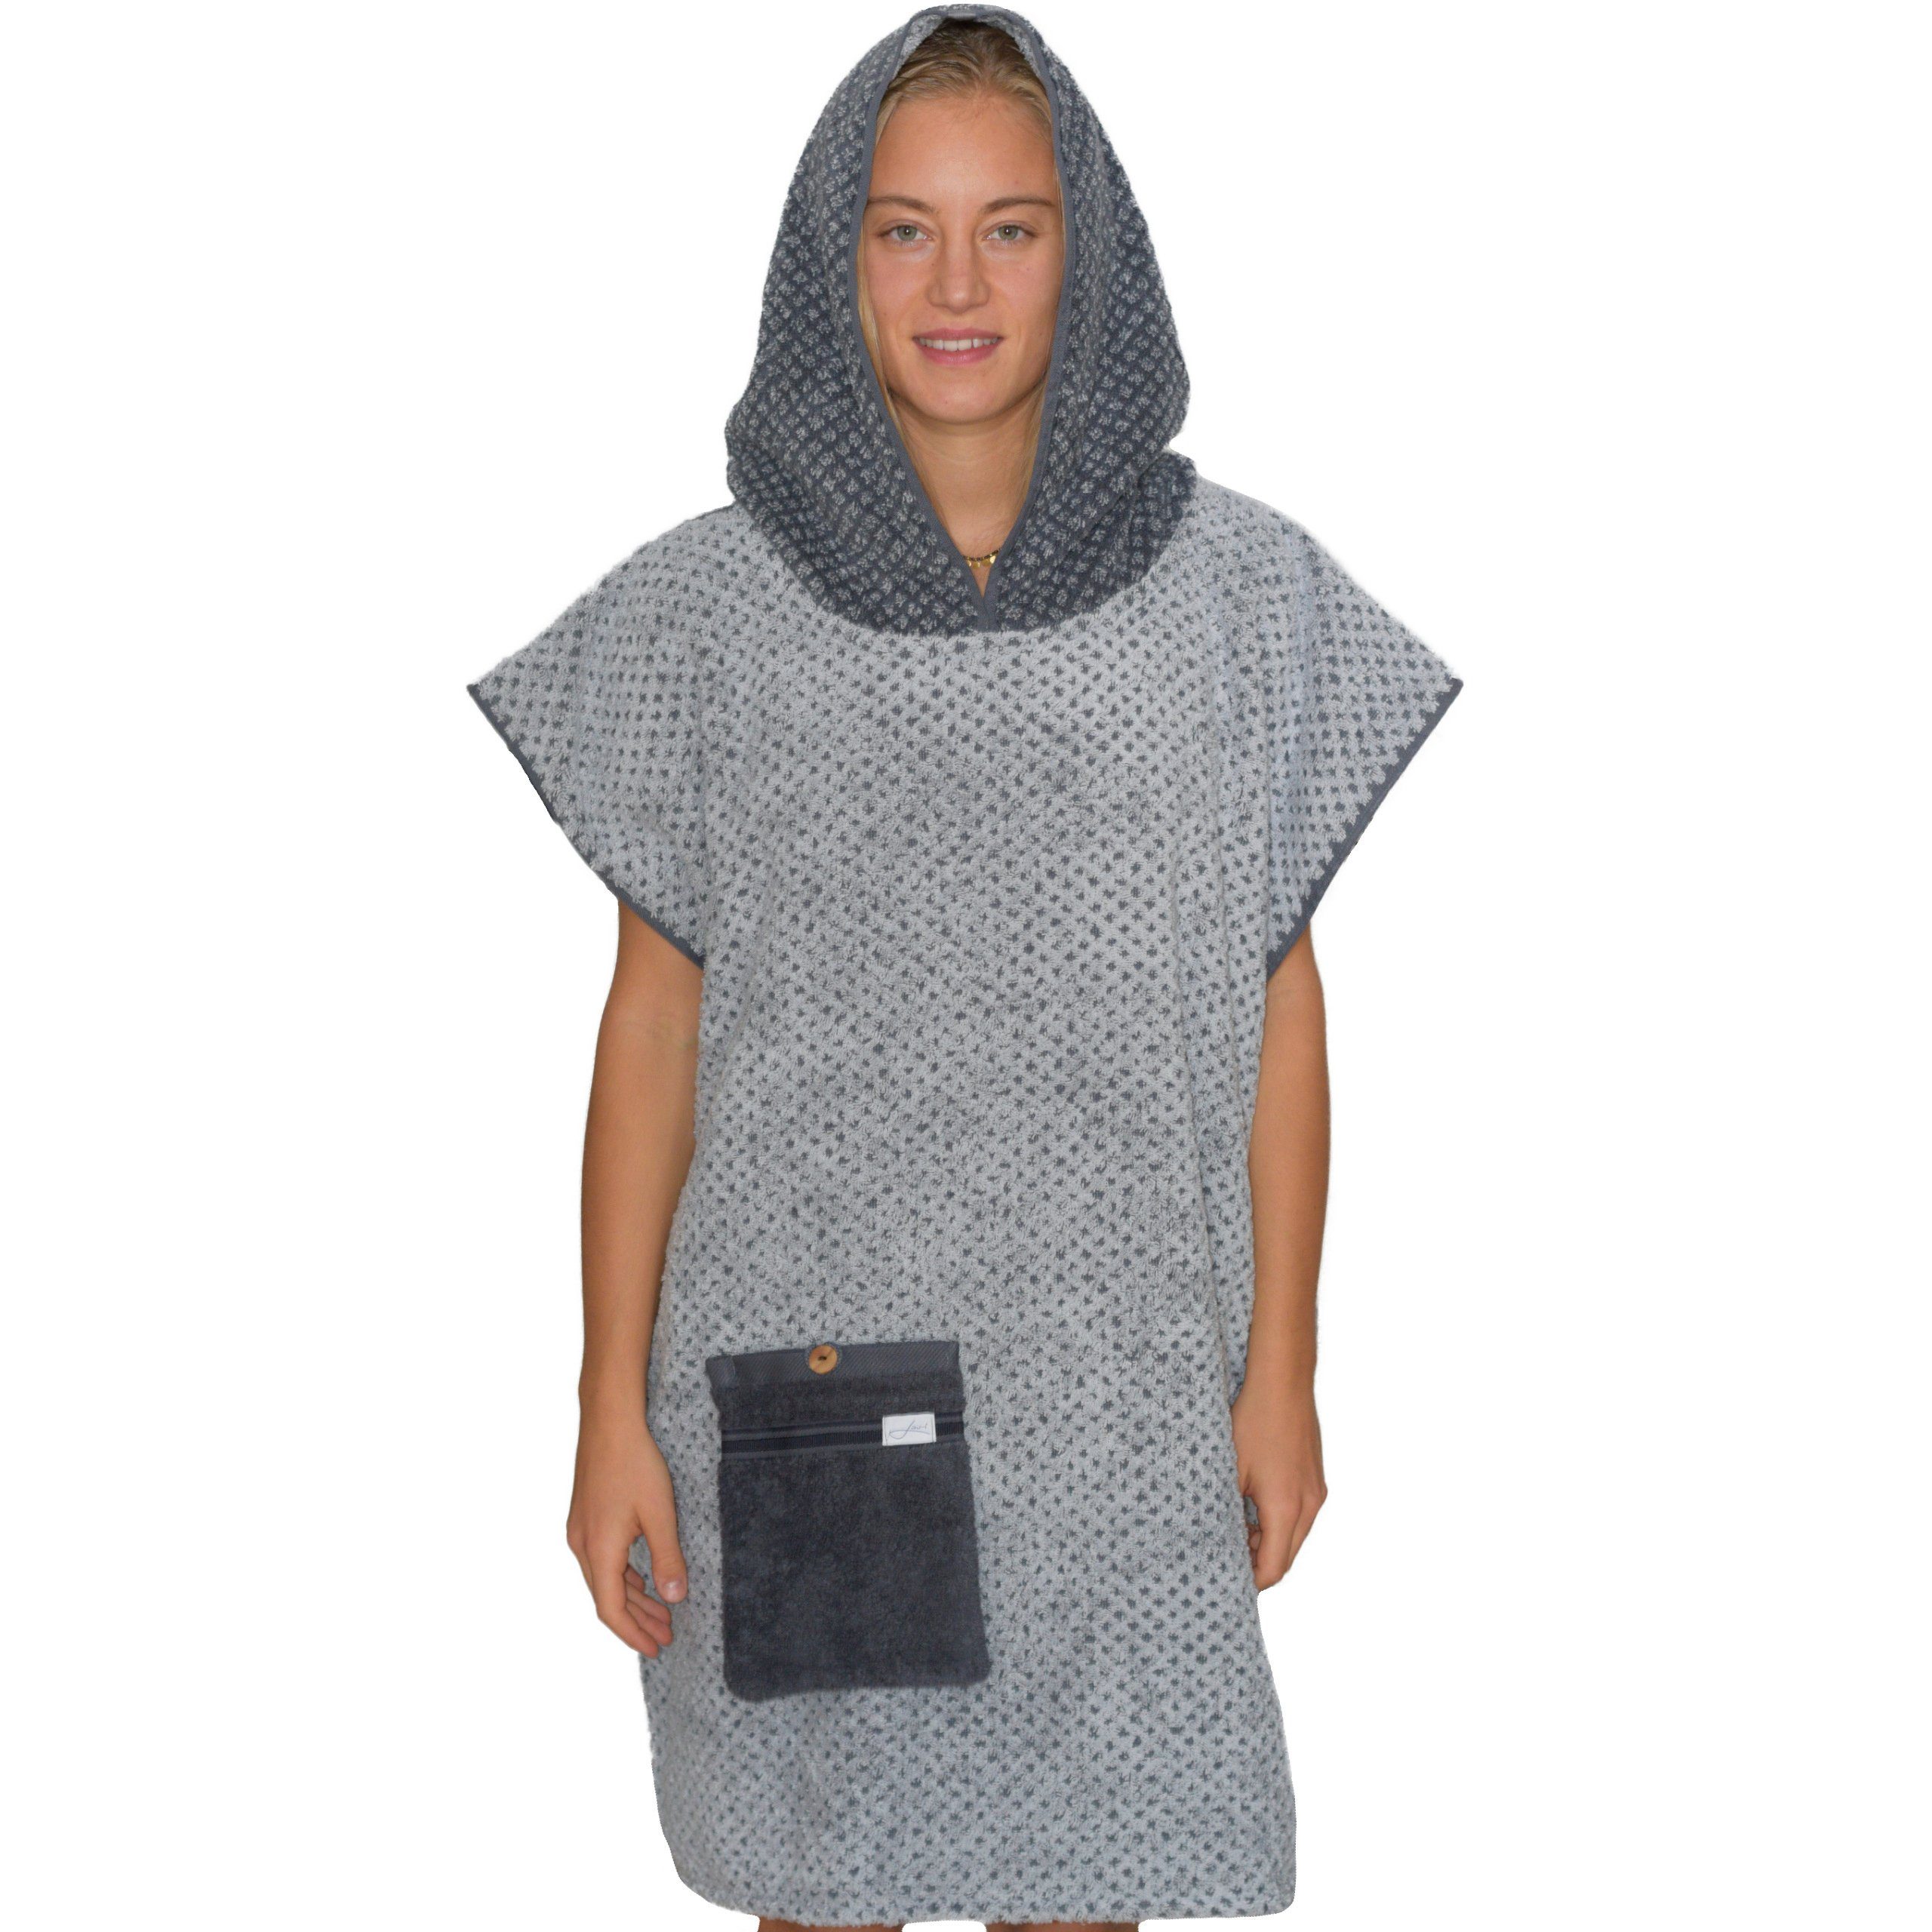 Lou-i Badeponcho Surfponcho Frottee Erwachsene Made in Germany Badeumhang, Kapuze, mit Kapuze und Tasche Silber